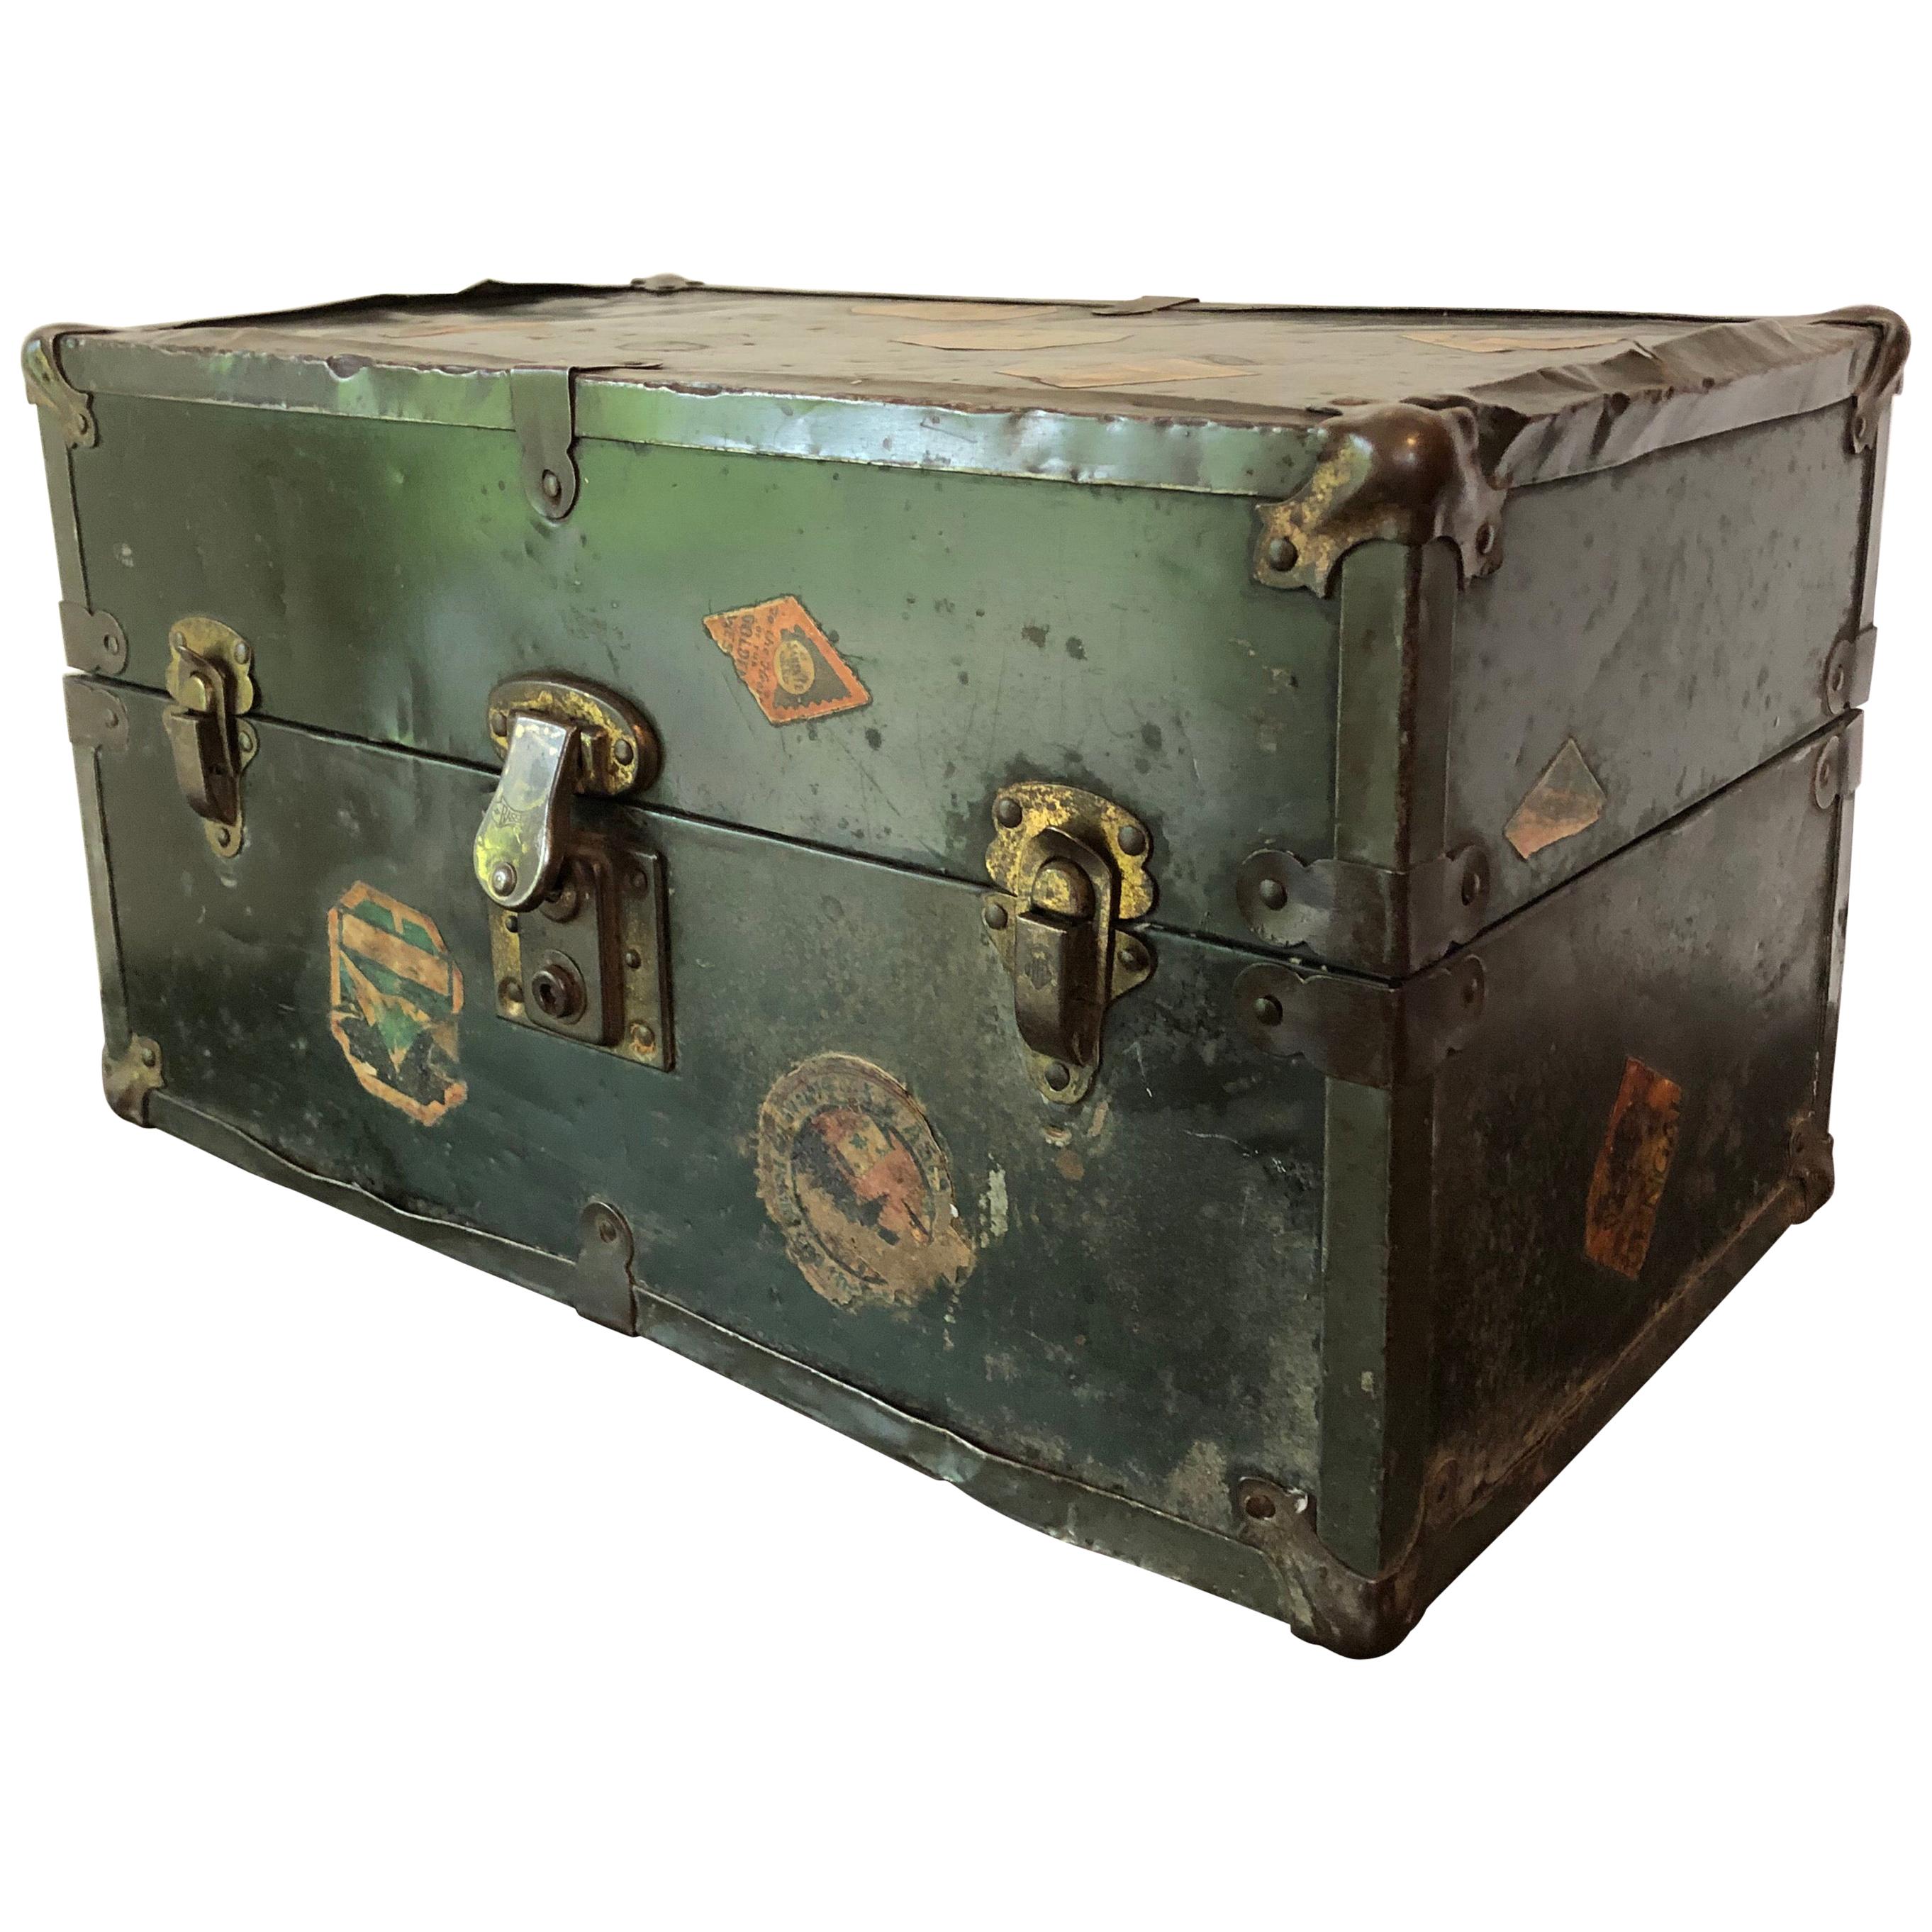 Vintage Metal Steamer Trunk with Luggage Label, Small For Sale